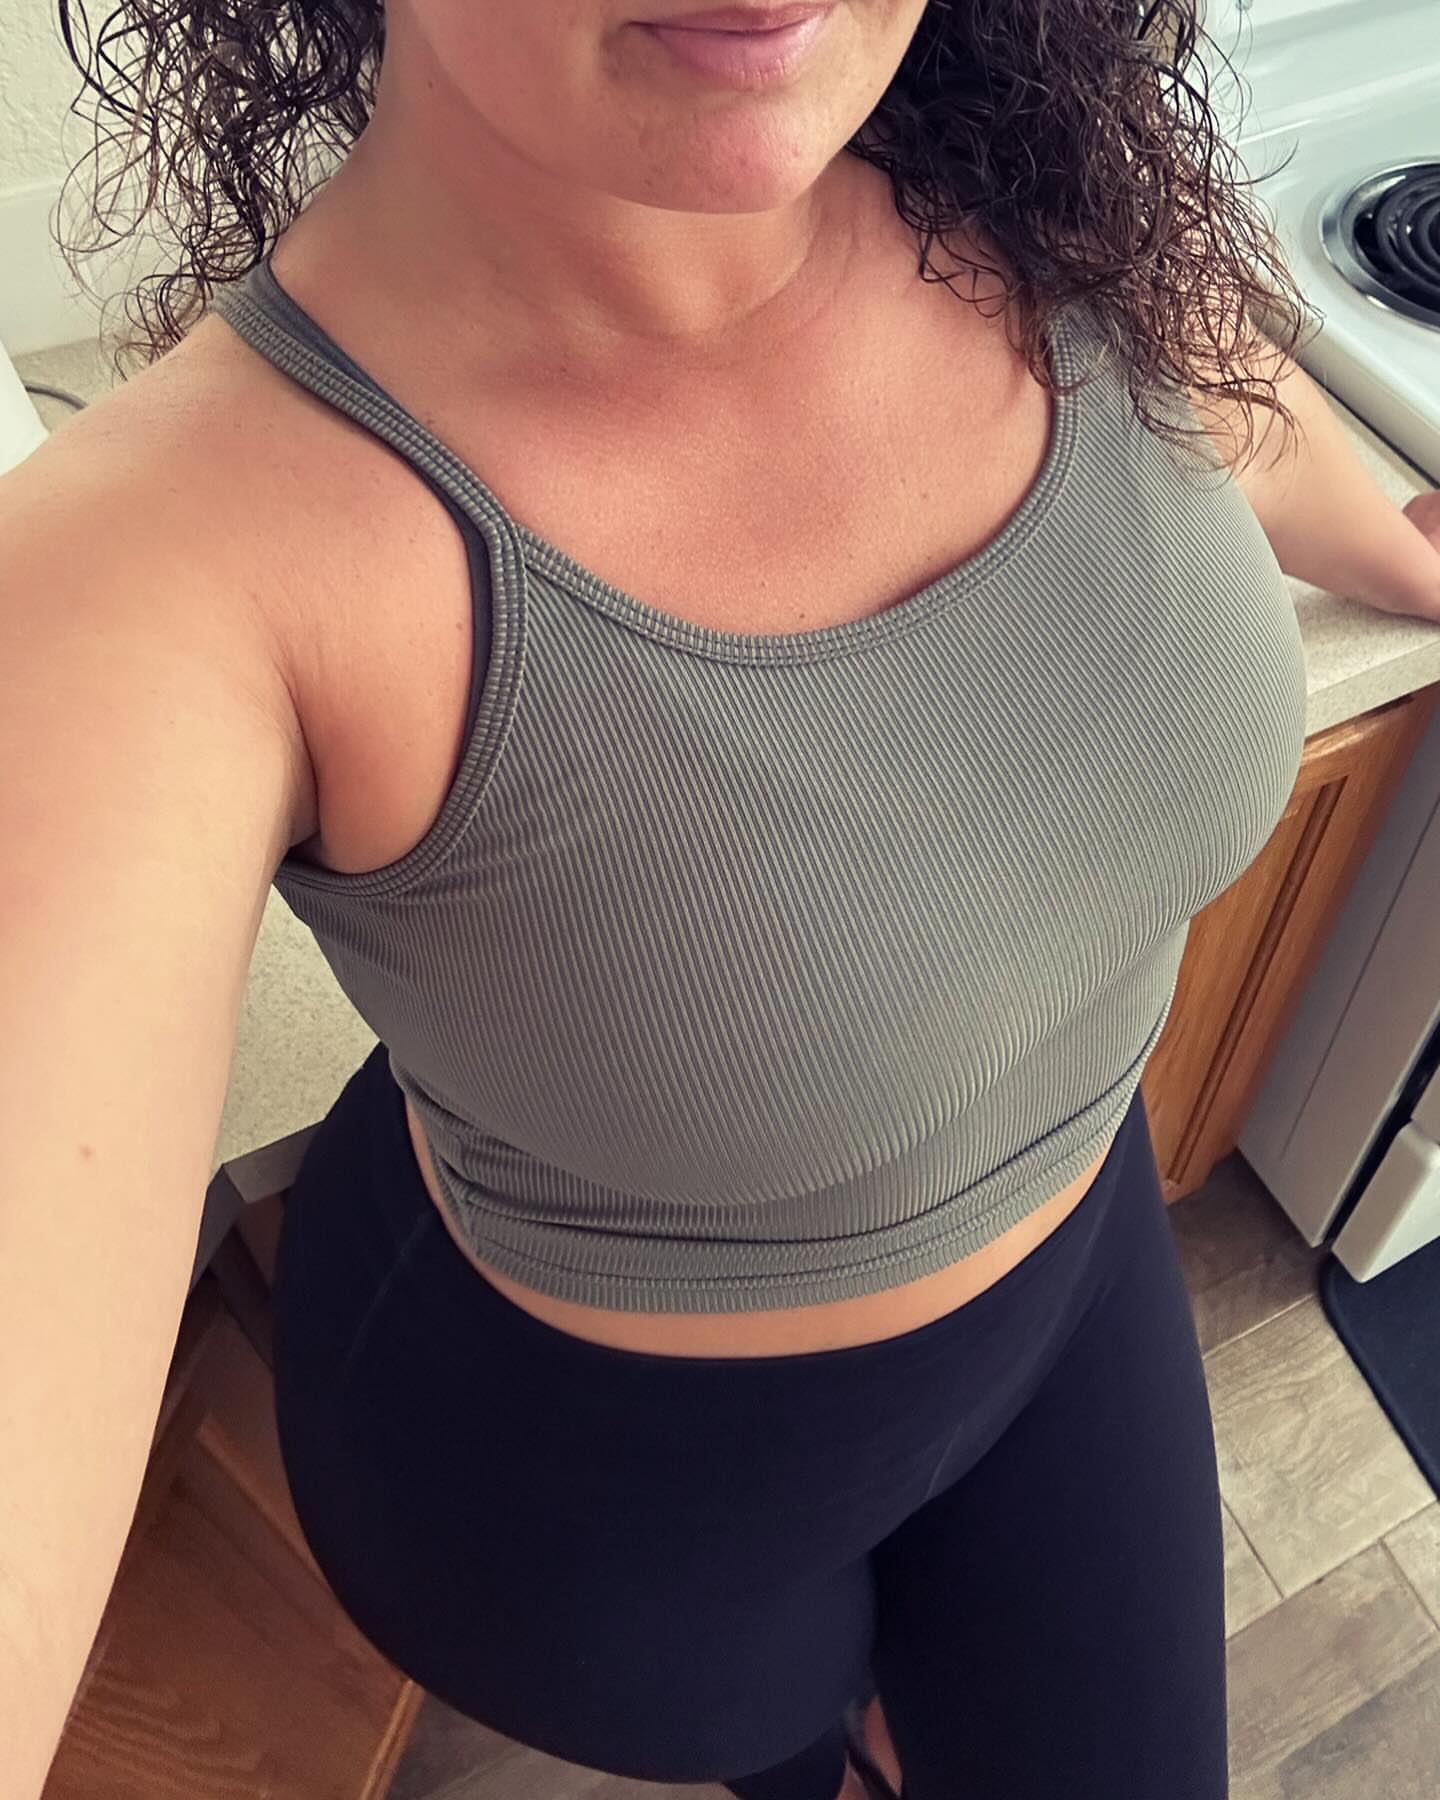 Are you hungry? #milf #onlyfans #sexy #curves #curvymom #curvy #curvesarebeautiful #hotwife #🍍